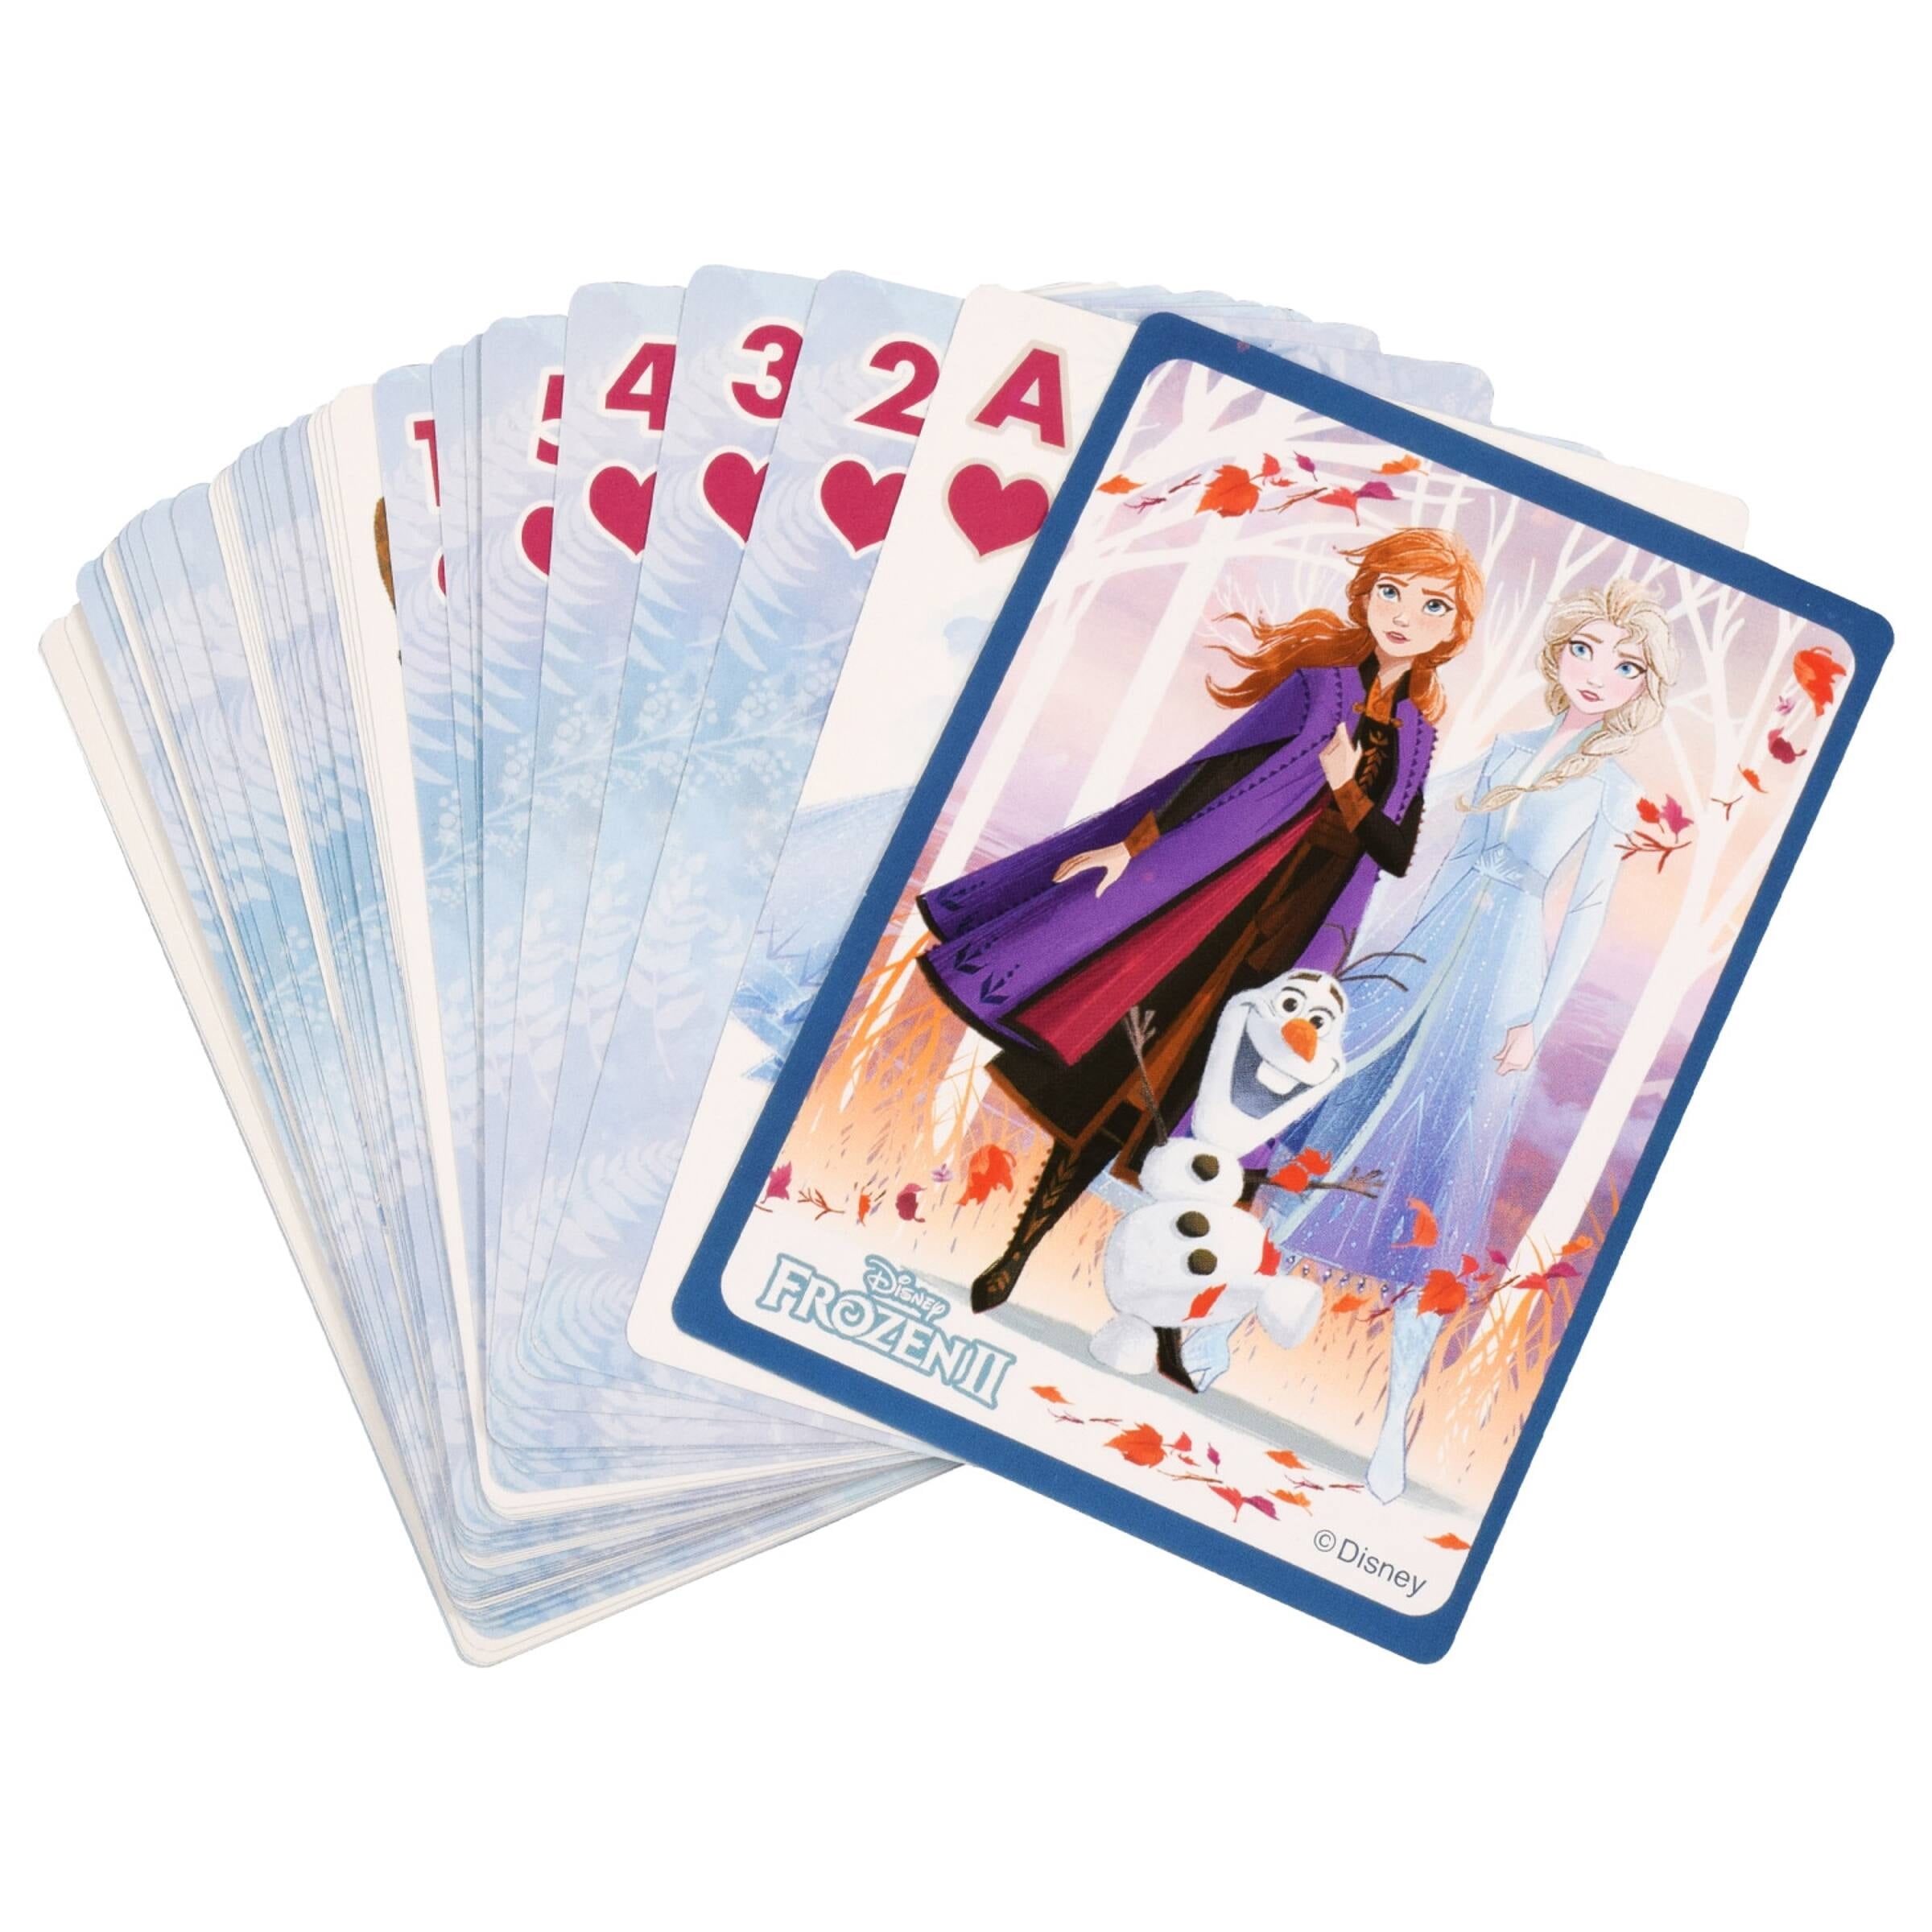 Frozen 2 Movie Jumbo Deck Playing Cards Disney Elsa Anna Olaf 2019 Large Cards 